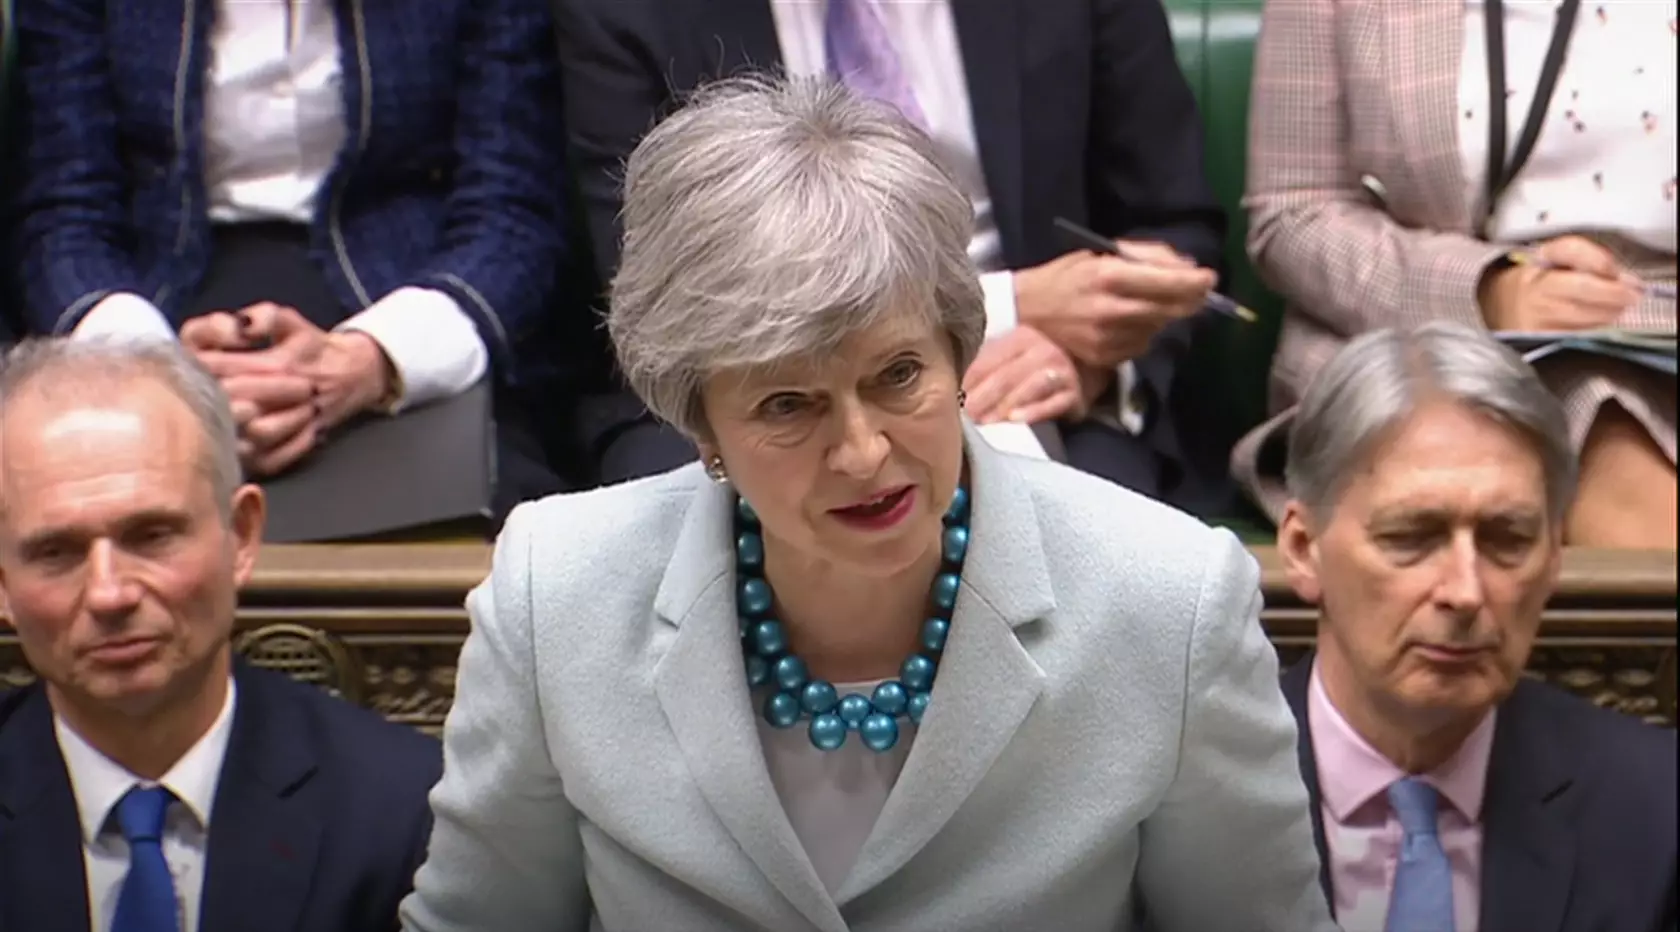 Theresa May us under pressure after her Brexit deal has been repeatedly voted down in the House of Commons.